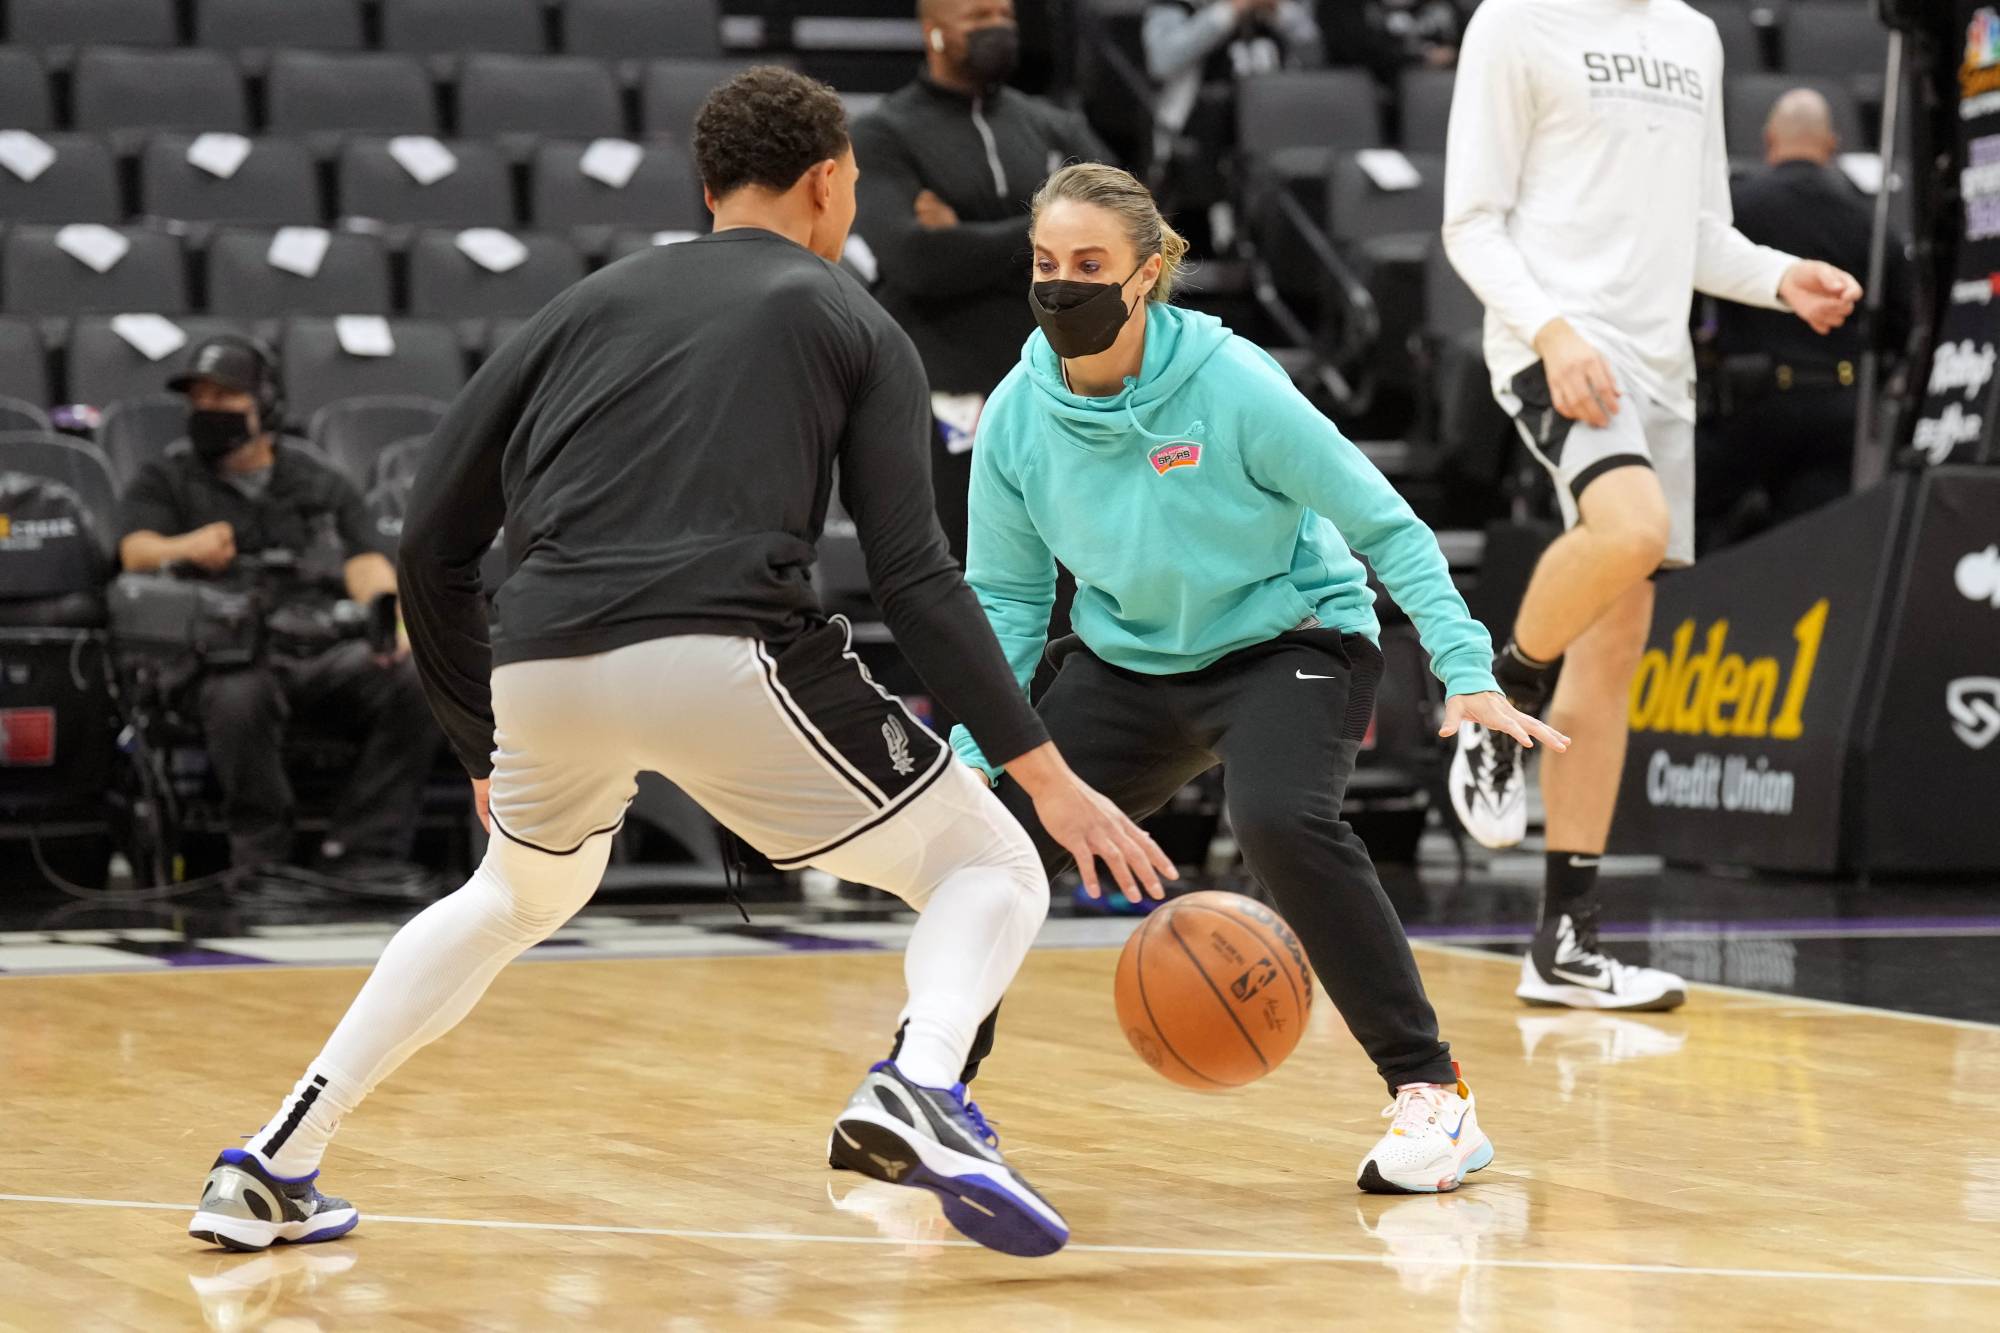 Becky Hammon details how Mark Davis' support led to Aces